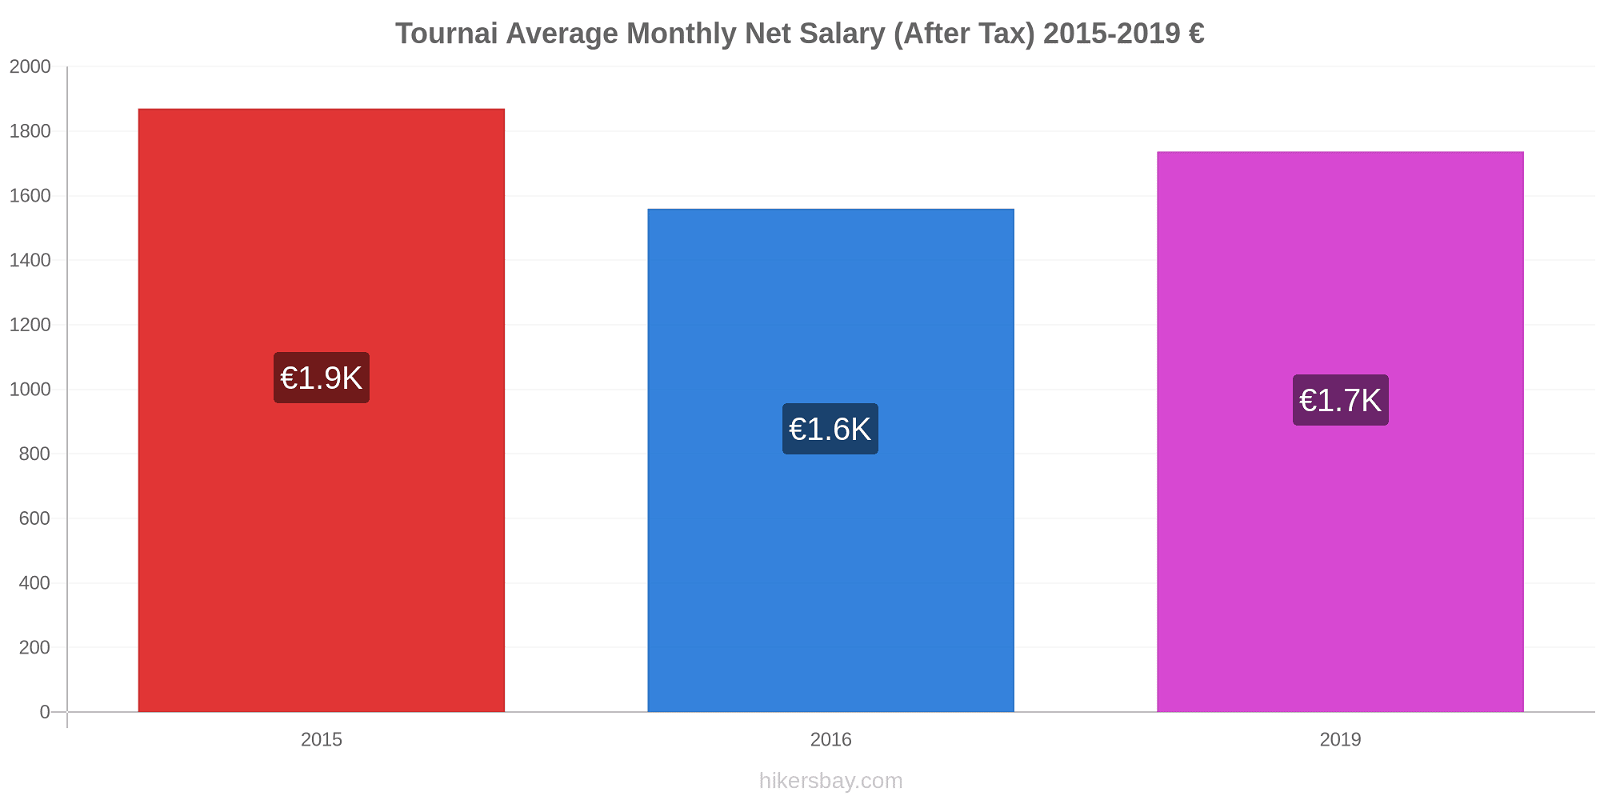 Tournai price changes Average Monthly Net Salary (After Tax) hikersbay.com